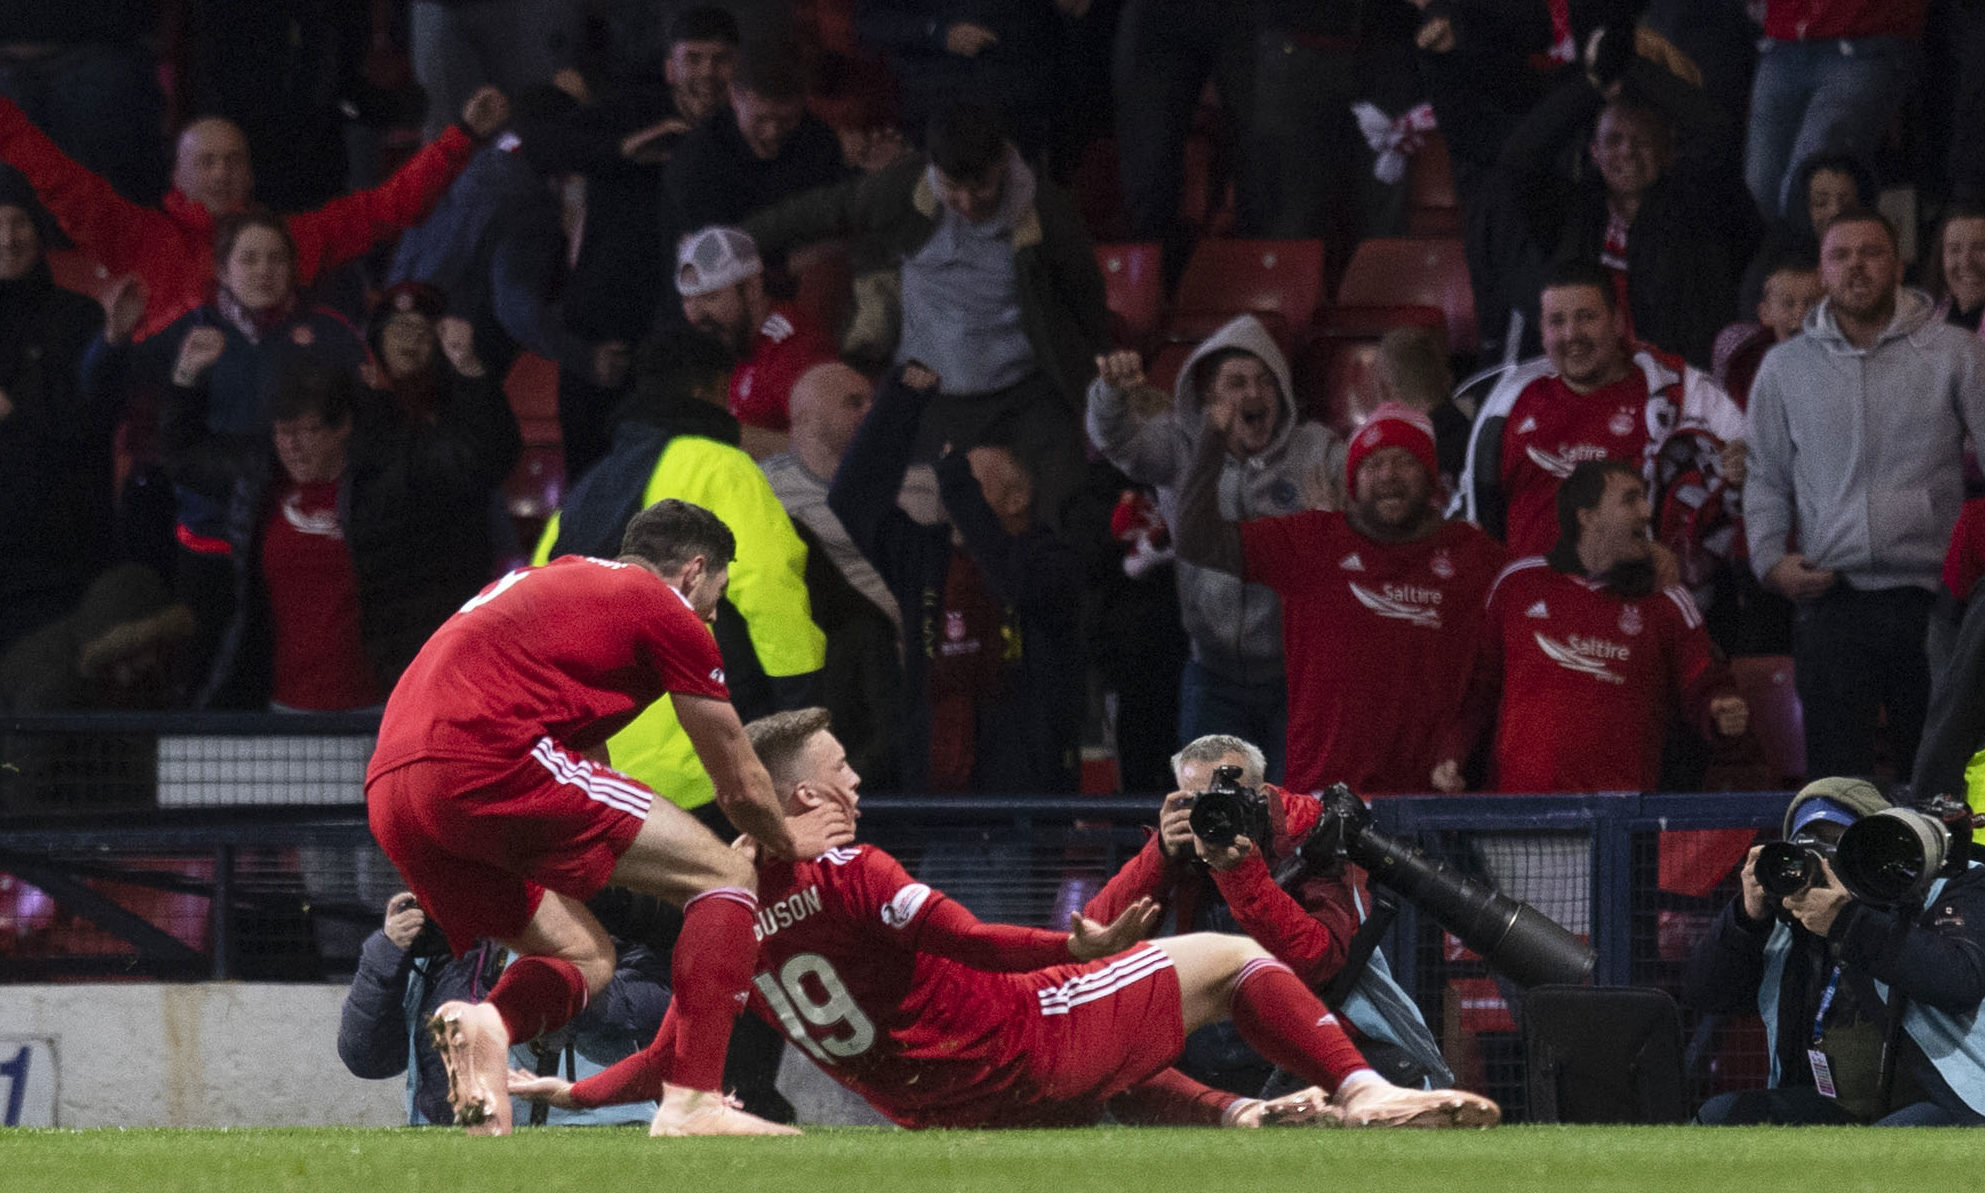 Lewis Ferguson celebrates his goal in front of the Aberdeen supporters.